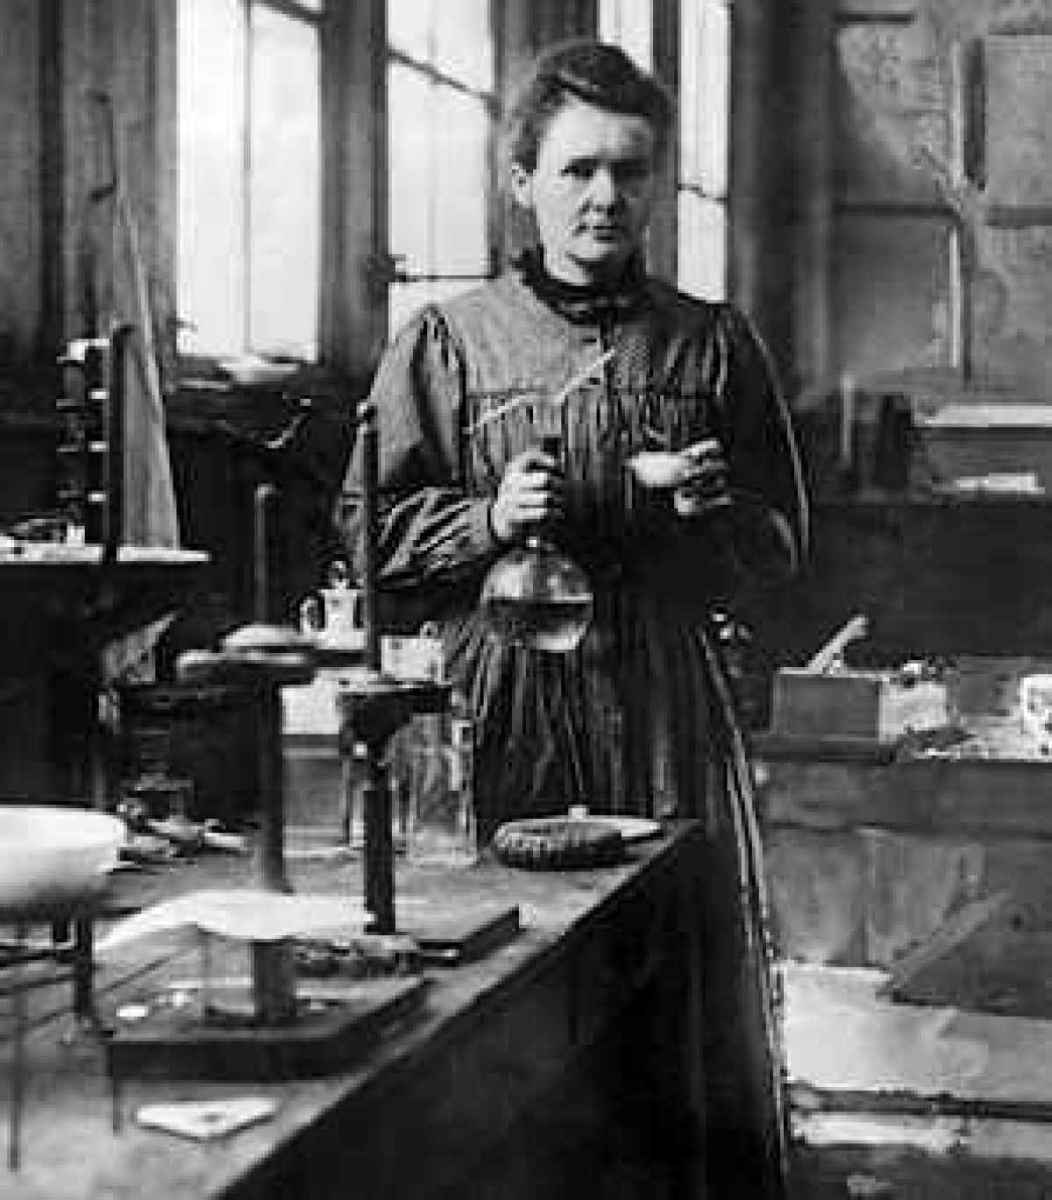 Marie Curie, discovered the radioactive element Polonium named after her home country Poland.